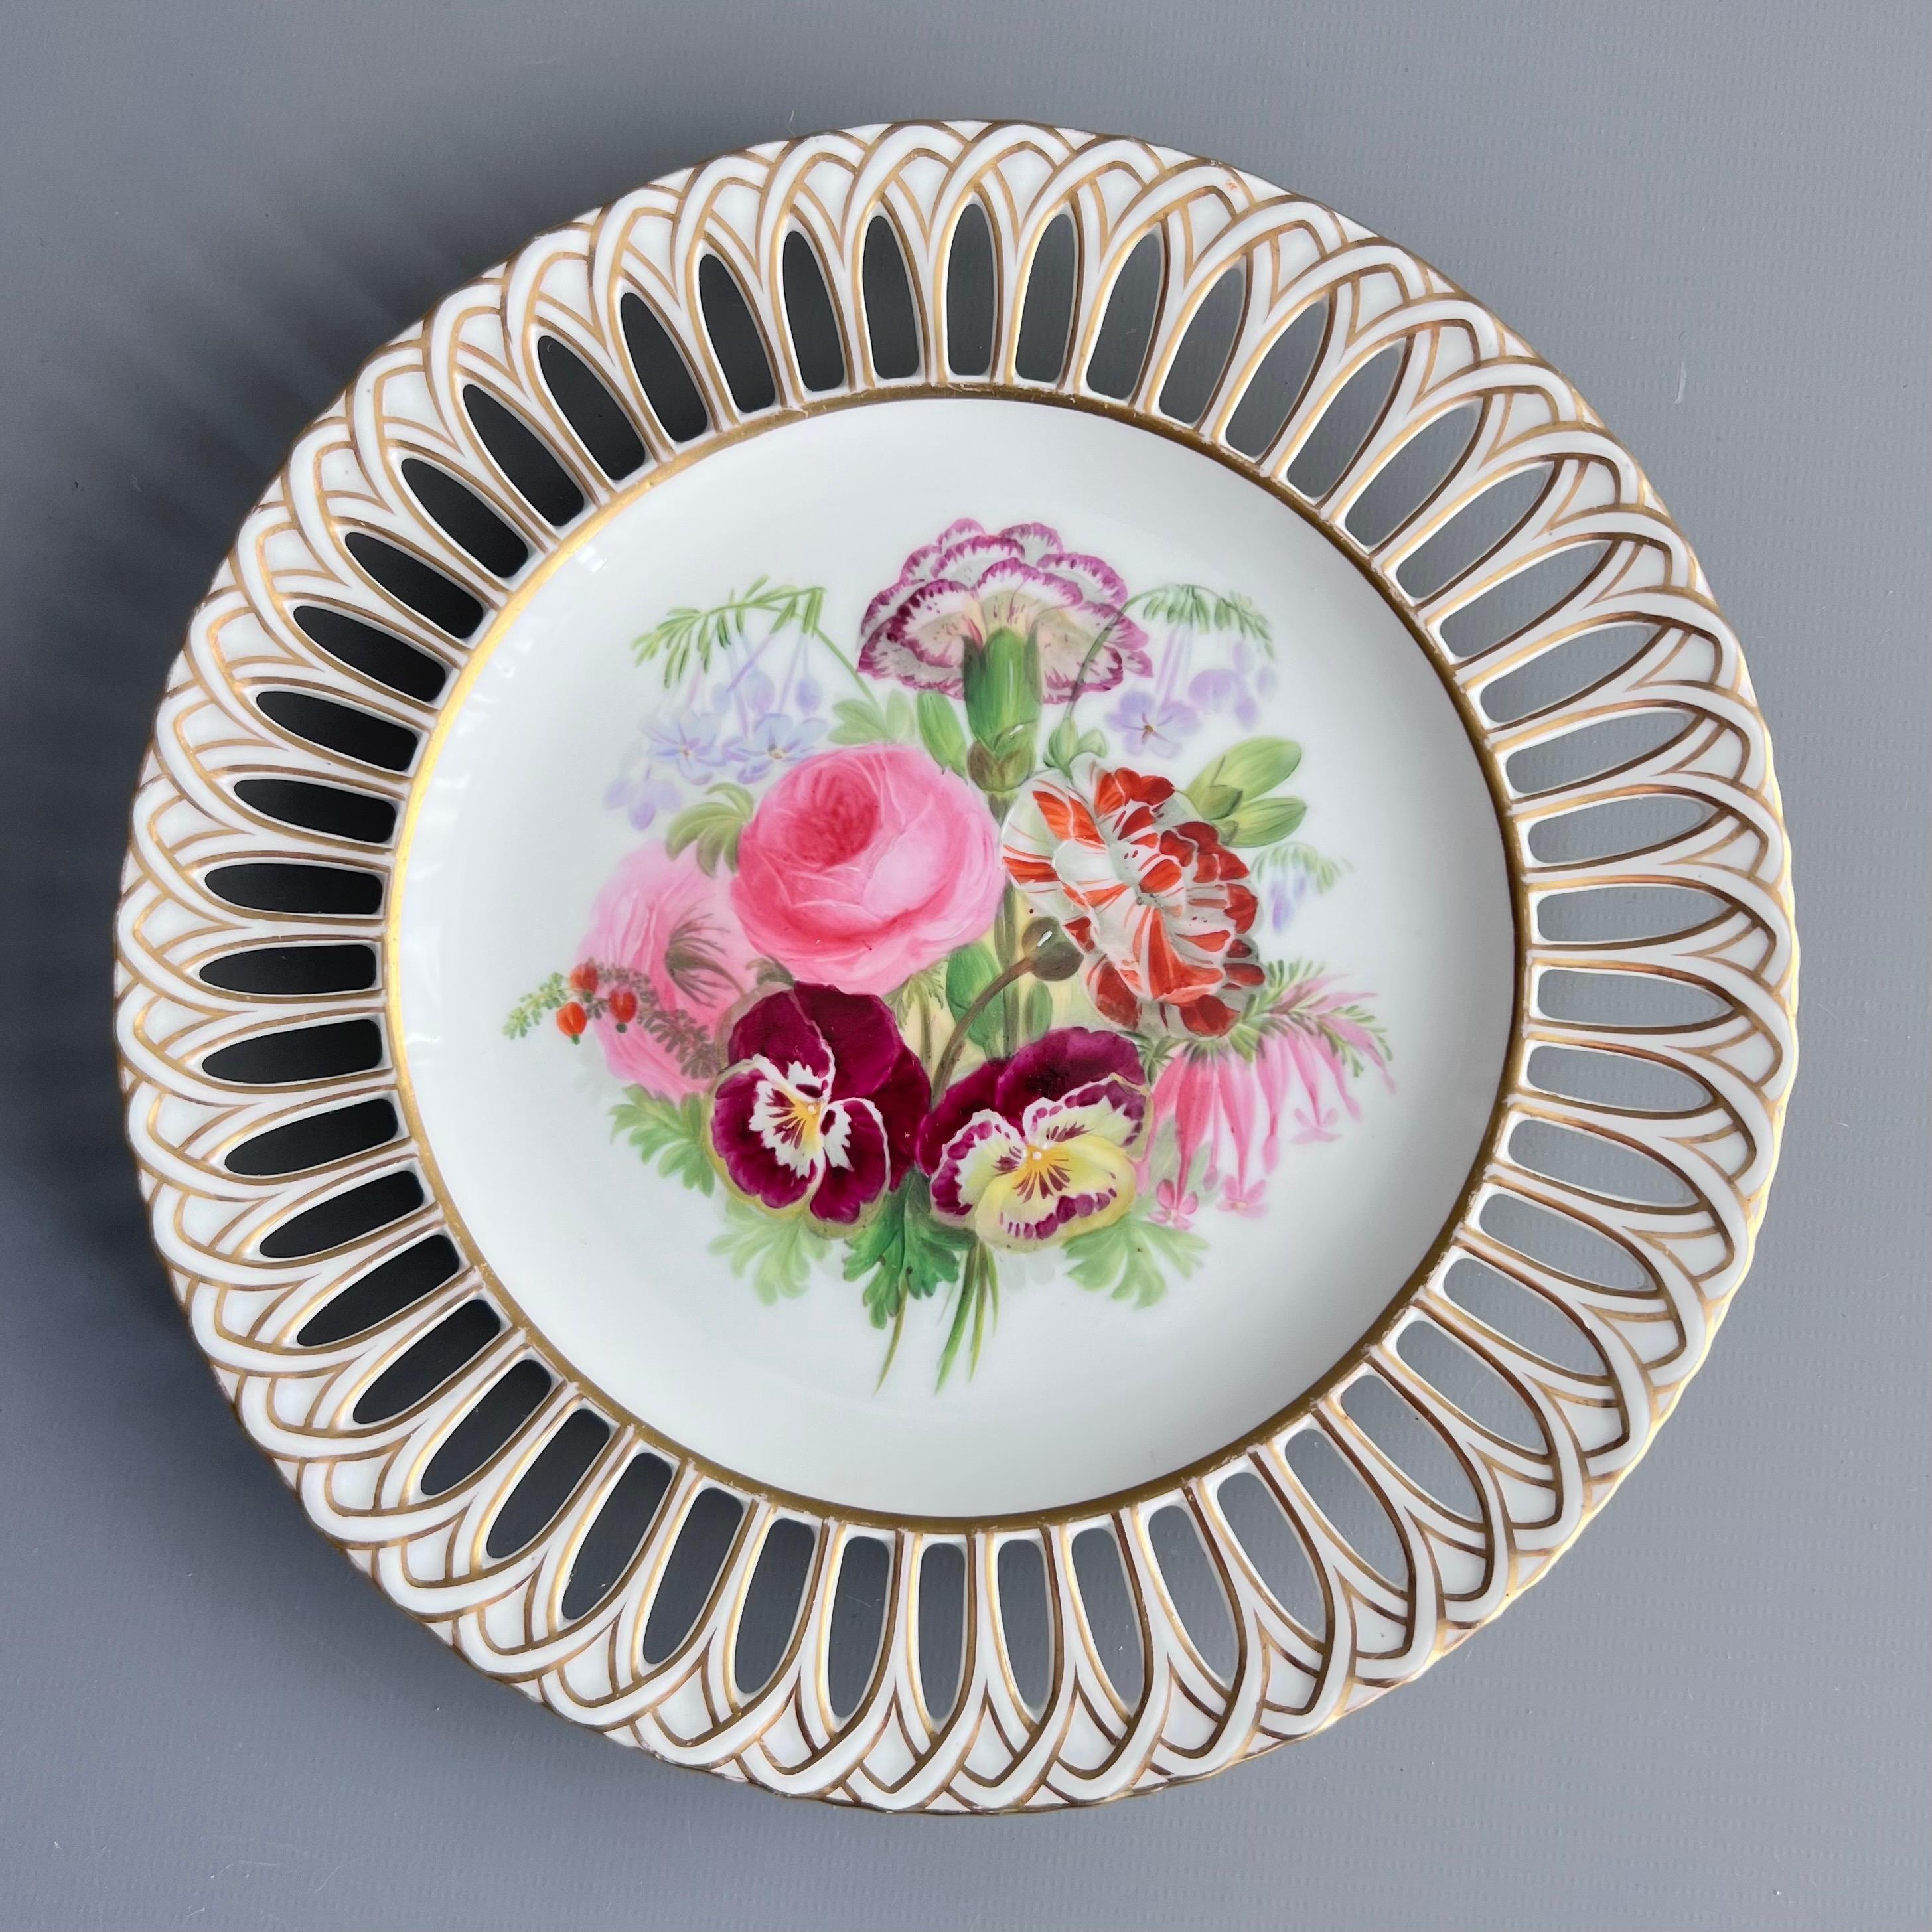 Copeland Set of 8 plates, Reticulated, Sublime Flowers by Greatbatch, 1848 For Sale 10